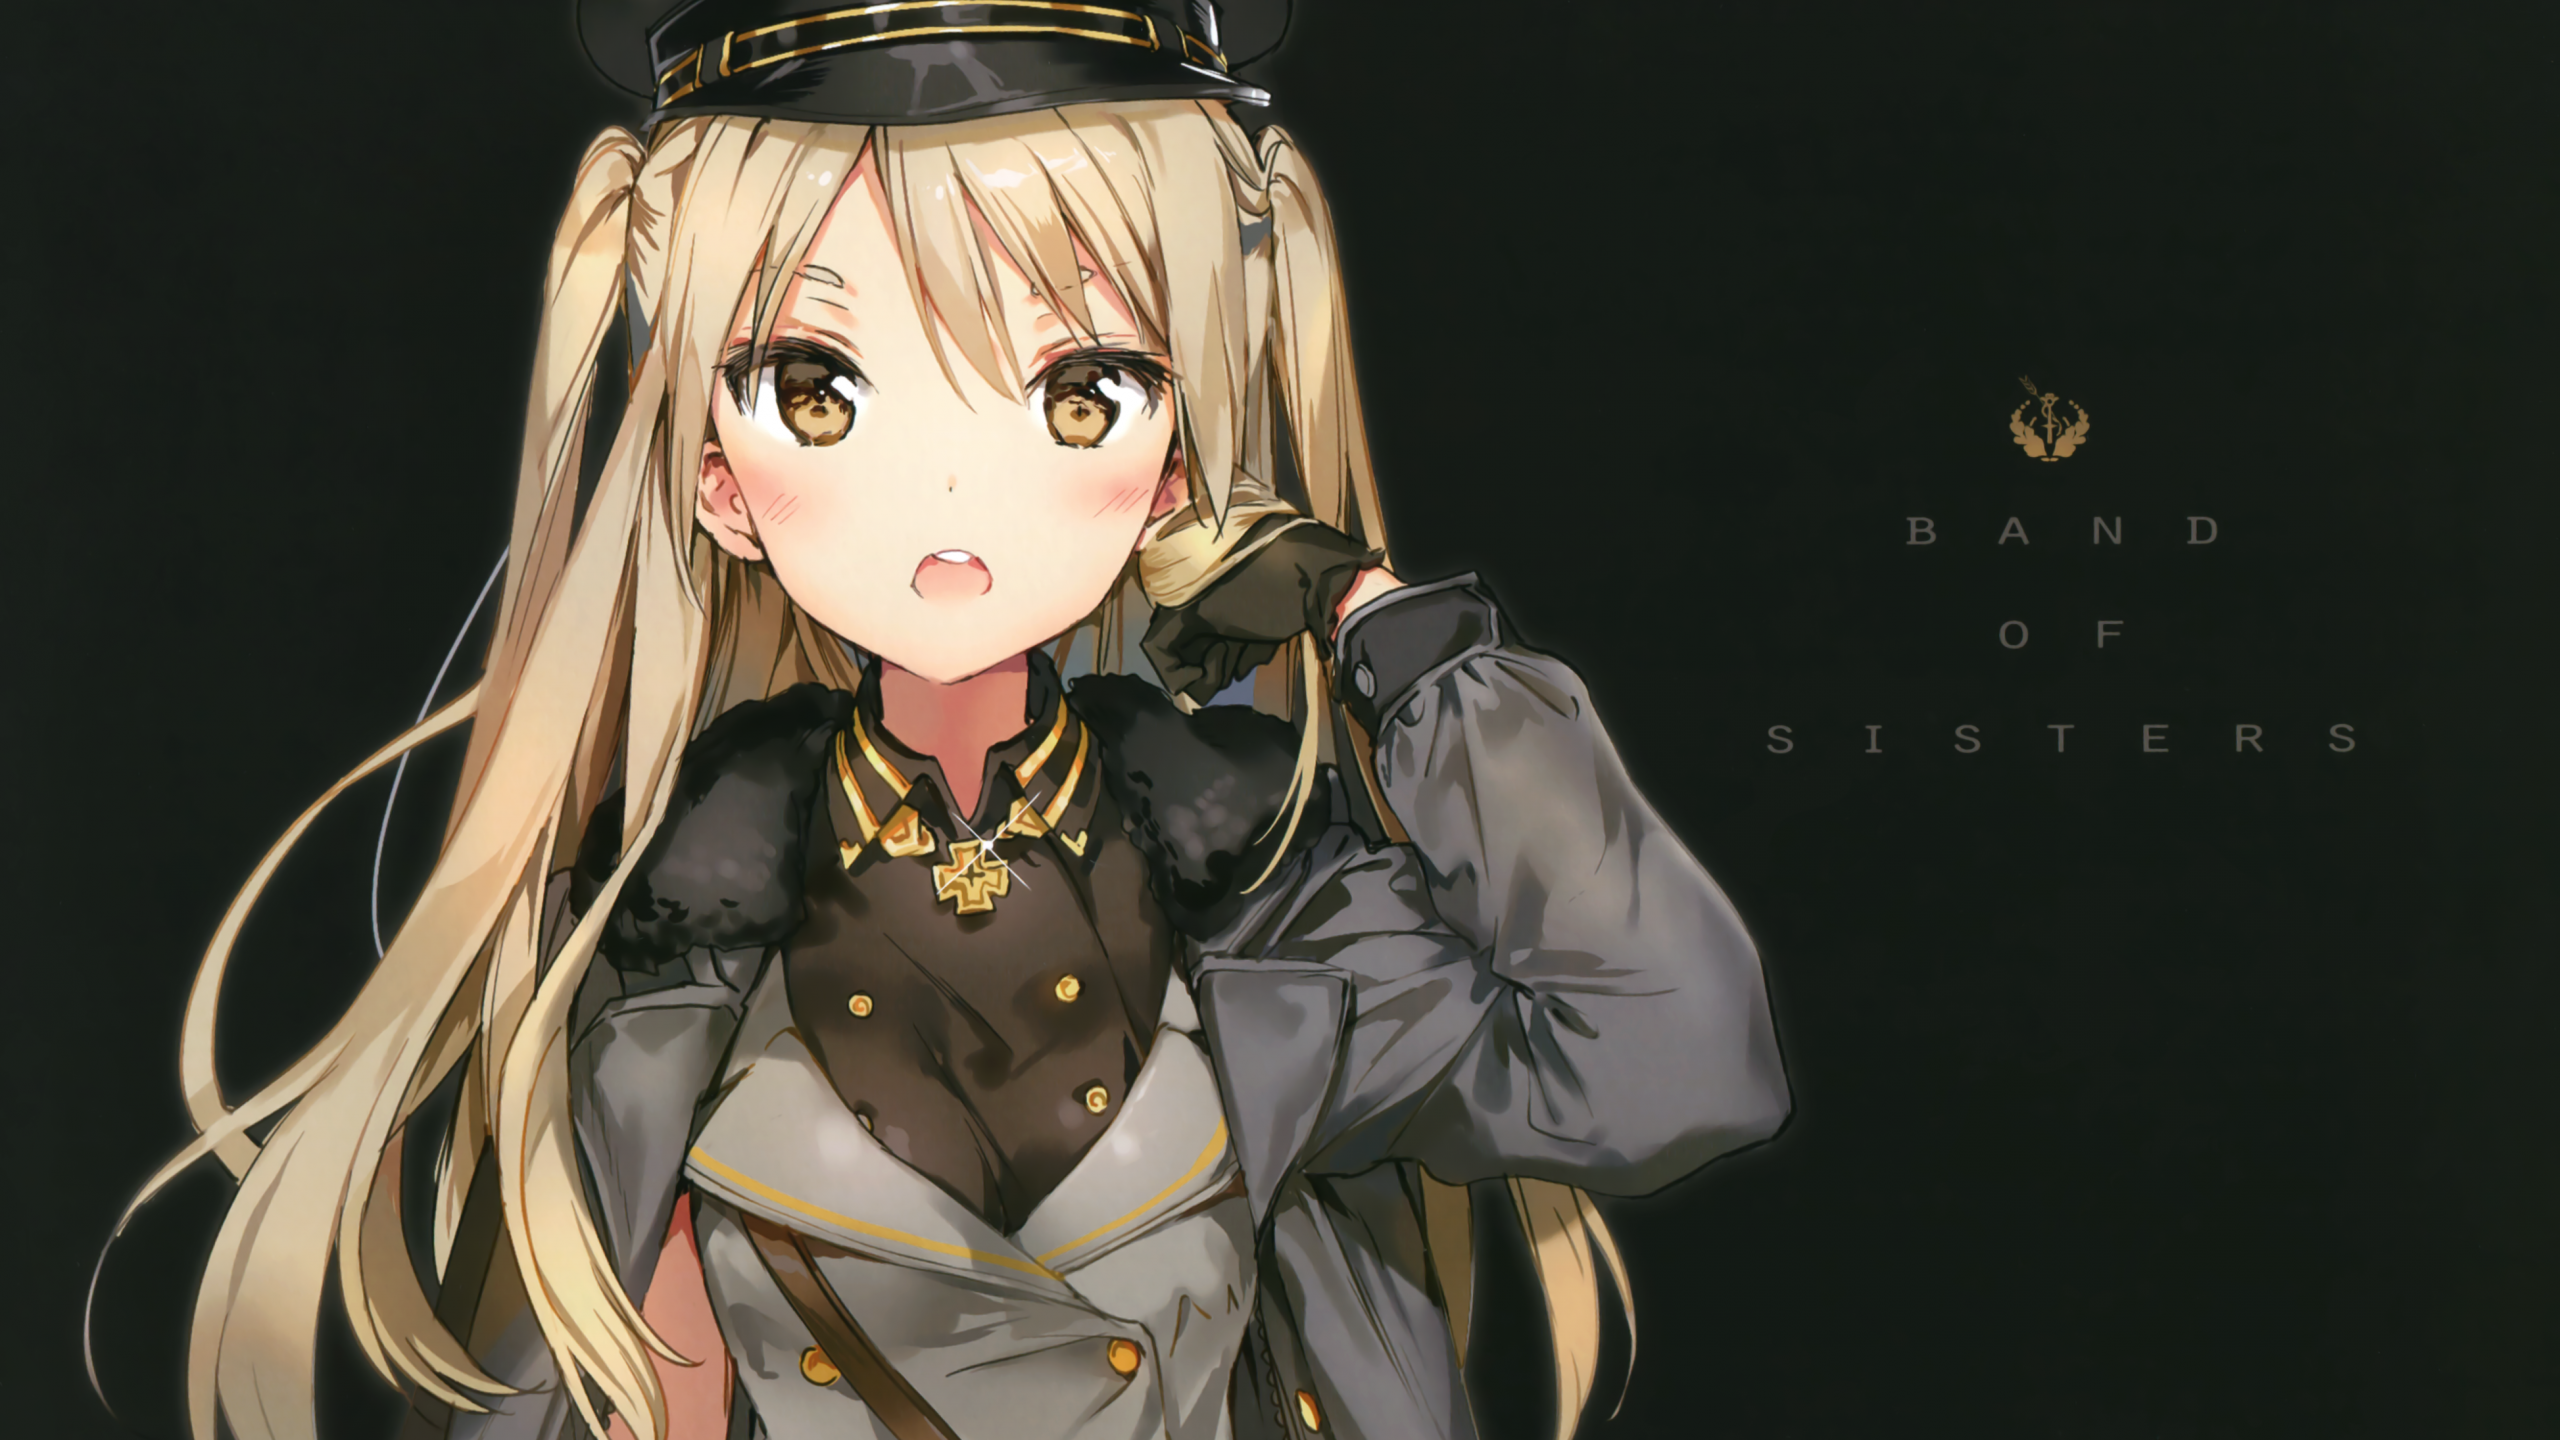 Download 2560x1440 Anime Girl, Blonde, Military Uniform, Twintails